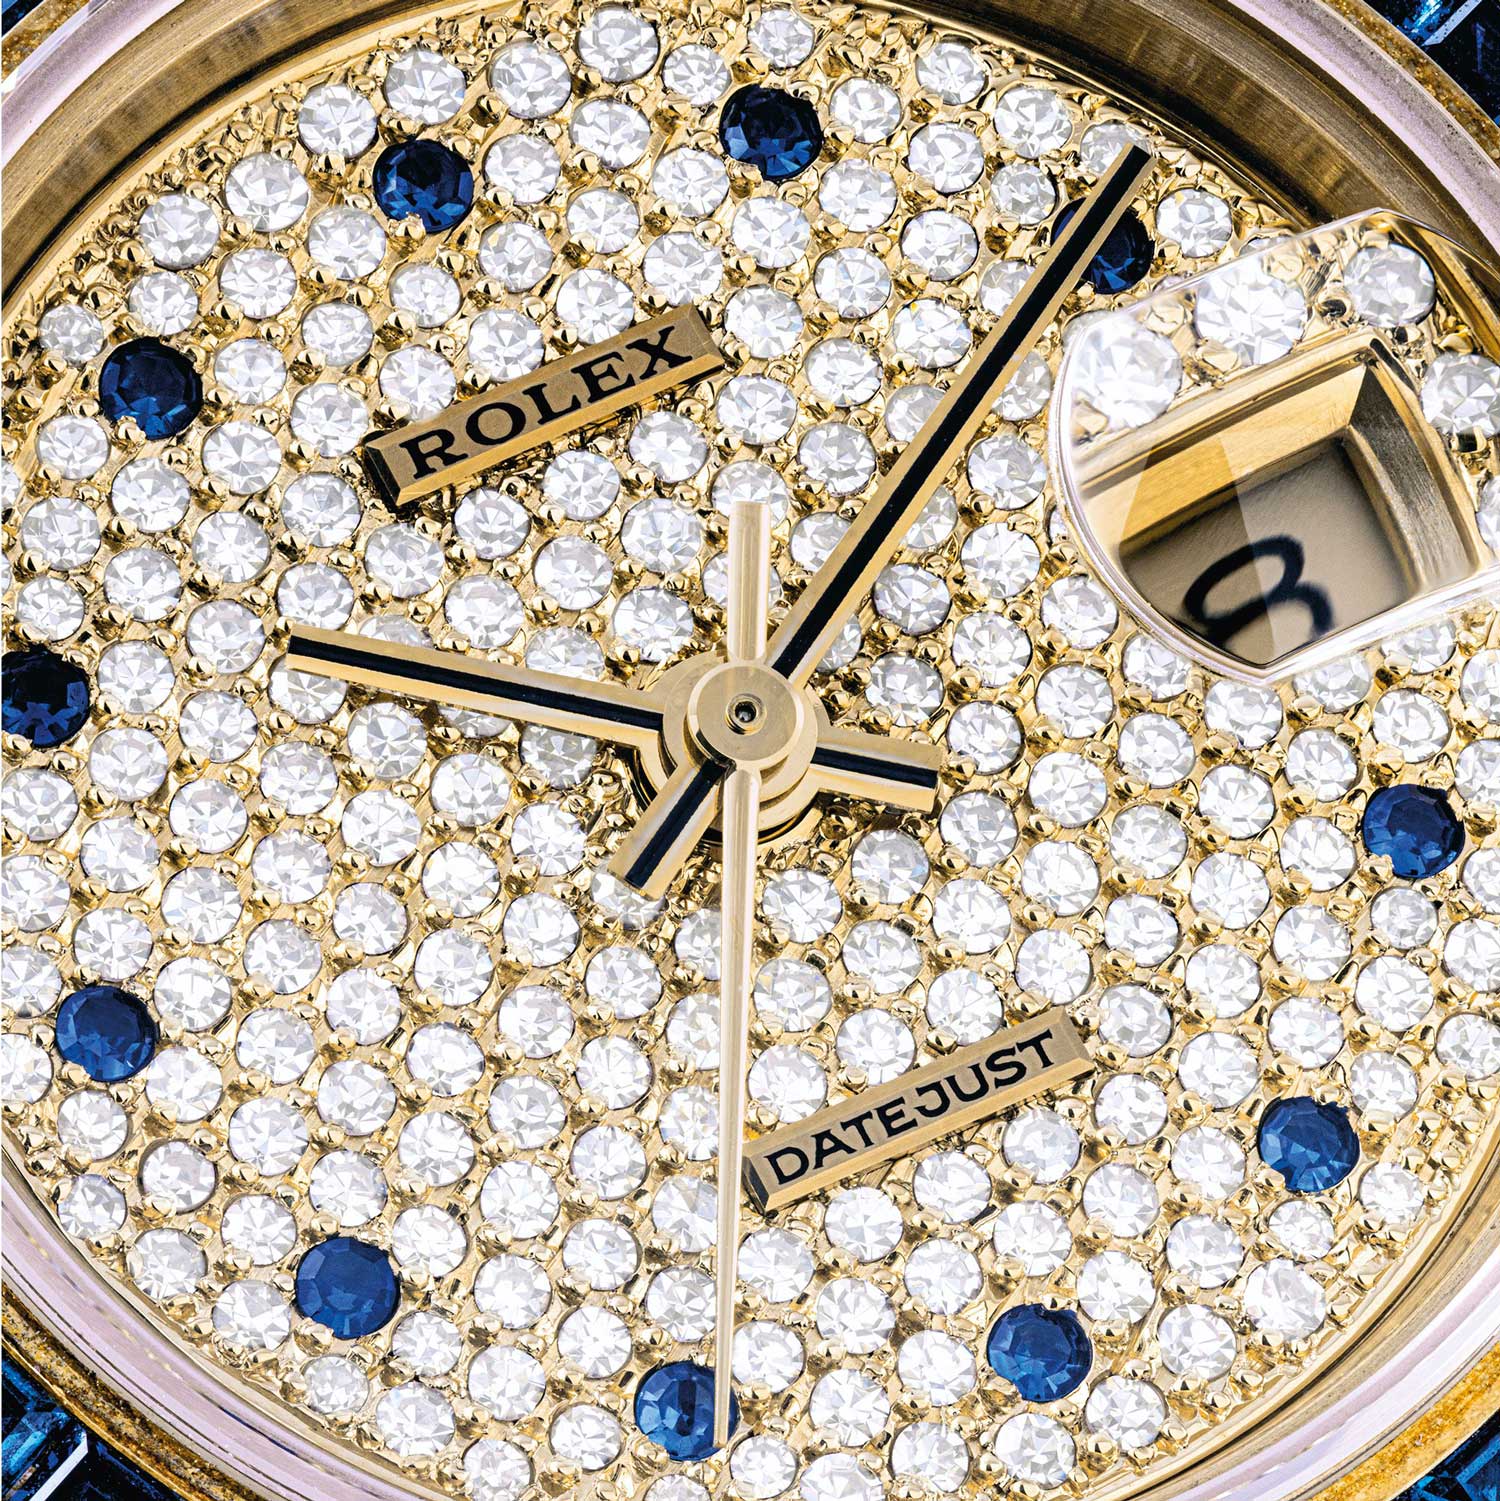 Lot 2240: Rolex Lady's Datejust with Diamonds and Sapphires, Ref. 69028